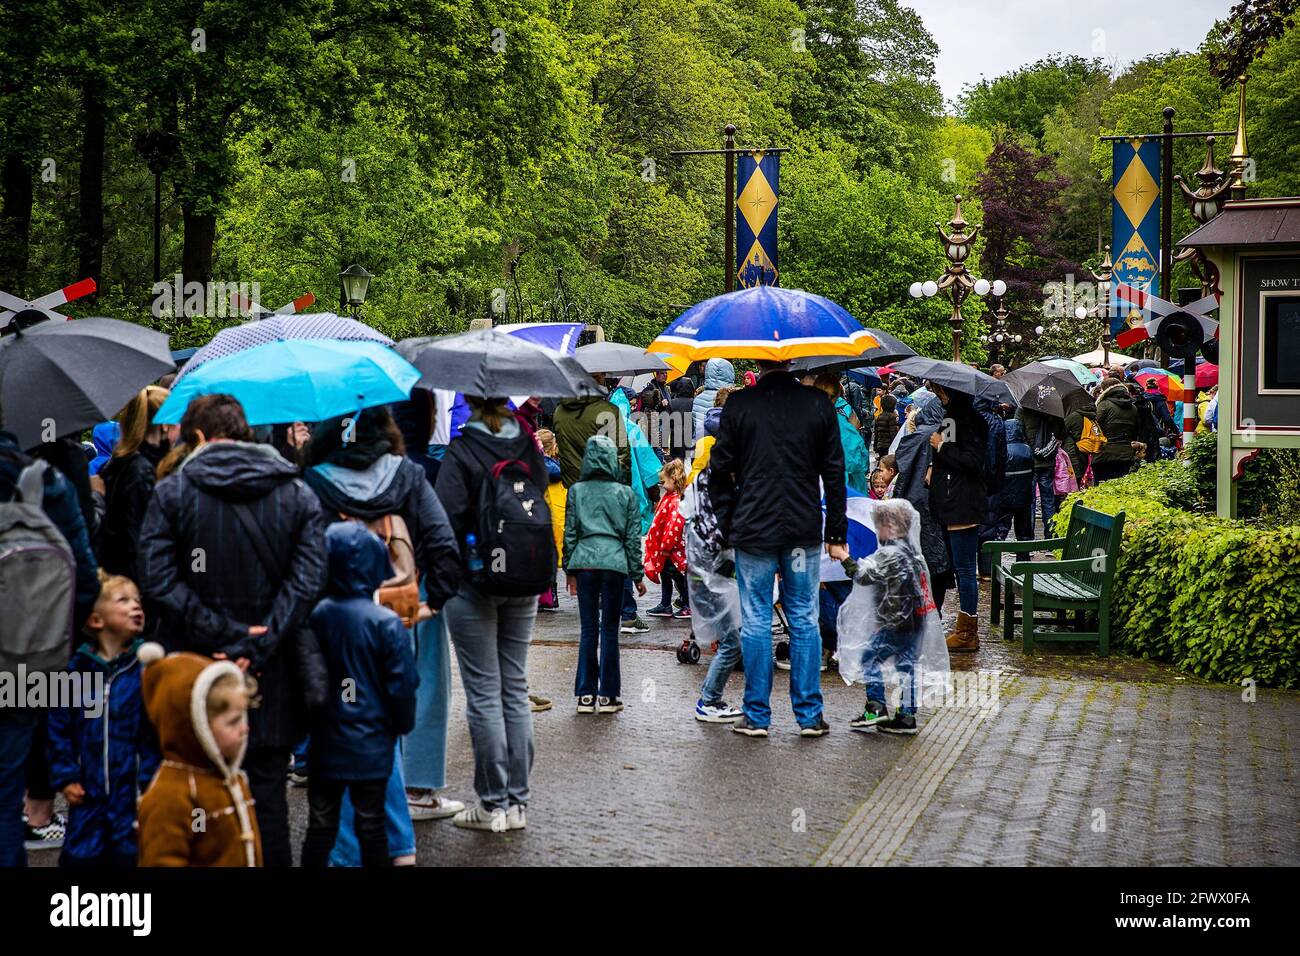 KAATSHEUVEL - 24-05-2021. Busy in Efteling on Whit Monday. Despite the  rain, many visitors came to the amusement park. Children, roller coaster,  attractions, baron, visitors, Brabant, crowded, efteling, kaatsheuvel,  spring, umbrella, park,